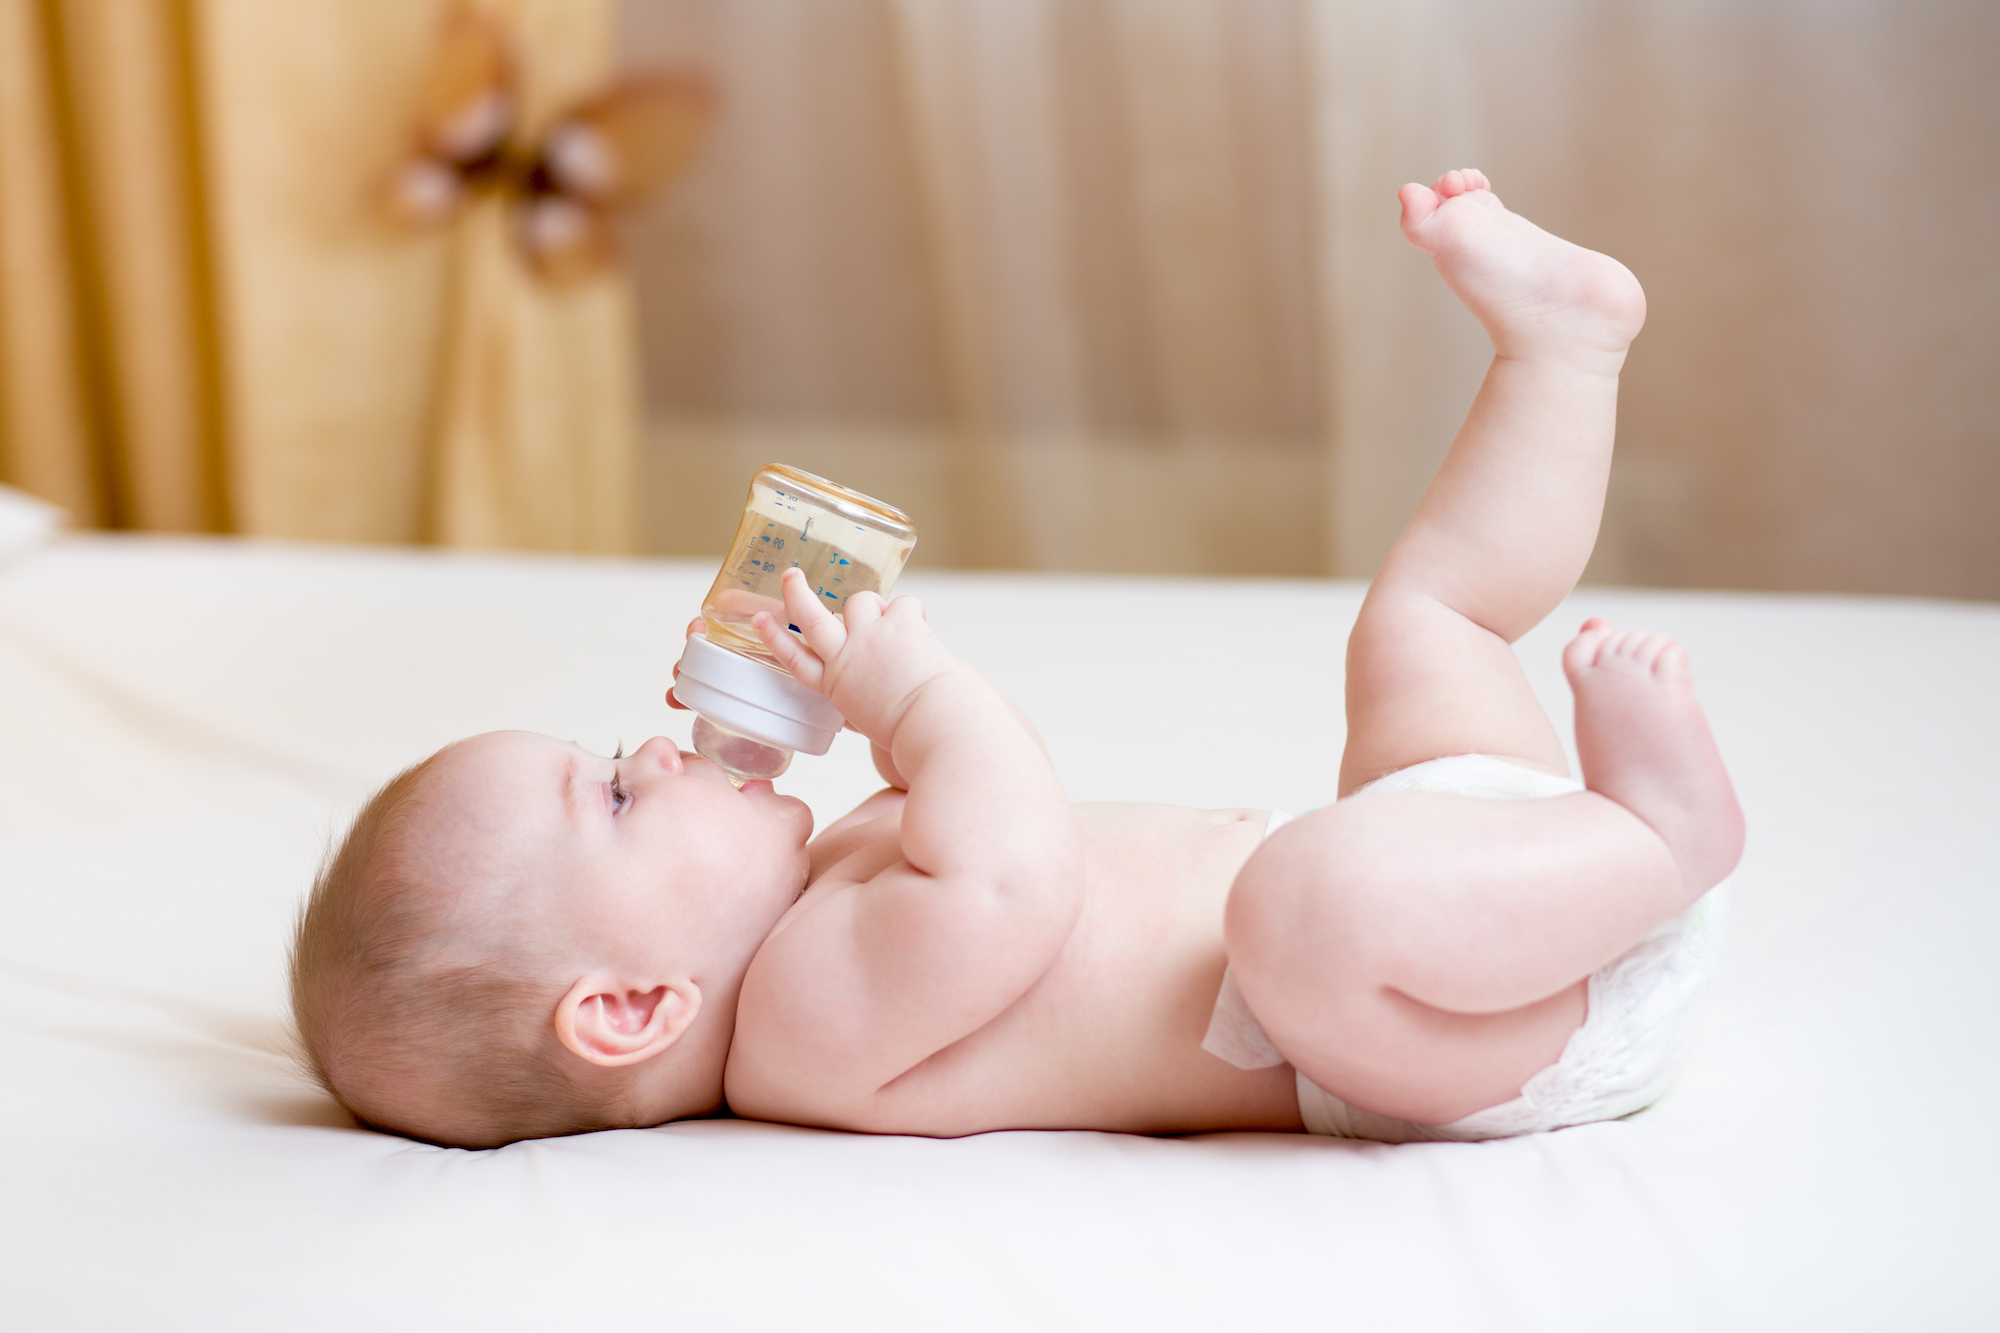 Avoid plastics and chemical exposure to babies and toddlers. How to choose a safe BPA-free bottles and sippy cups without toxic chemicals. 